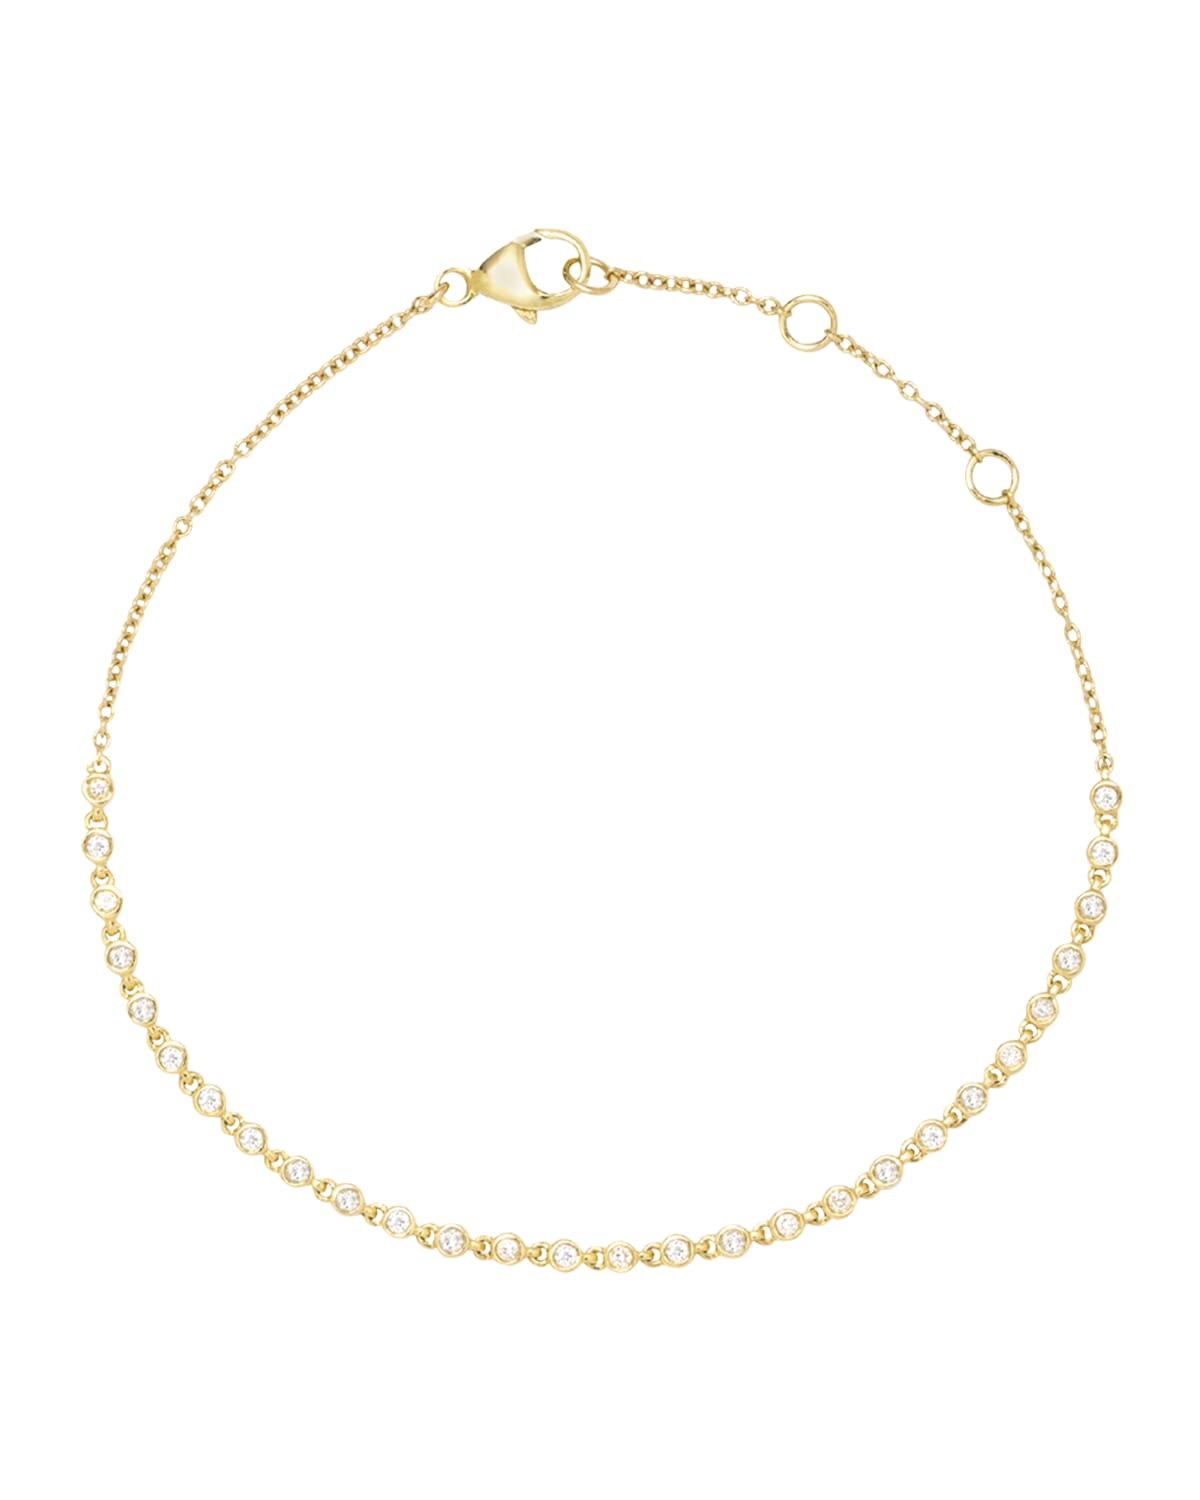 Stone And Strand Dainty Raly Tennis Bracelet In Gold